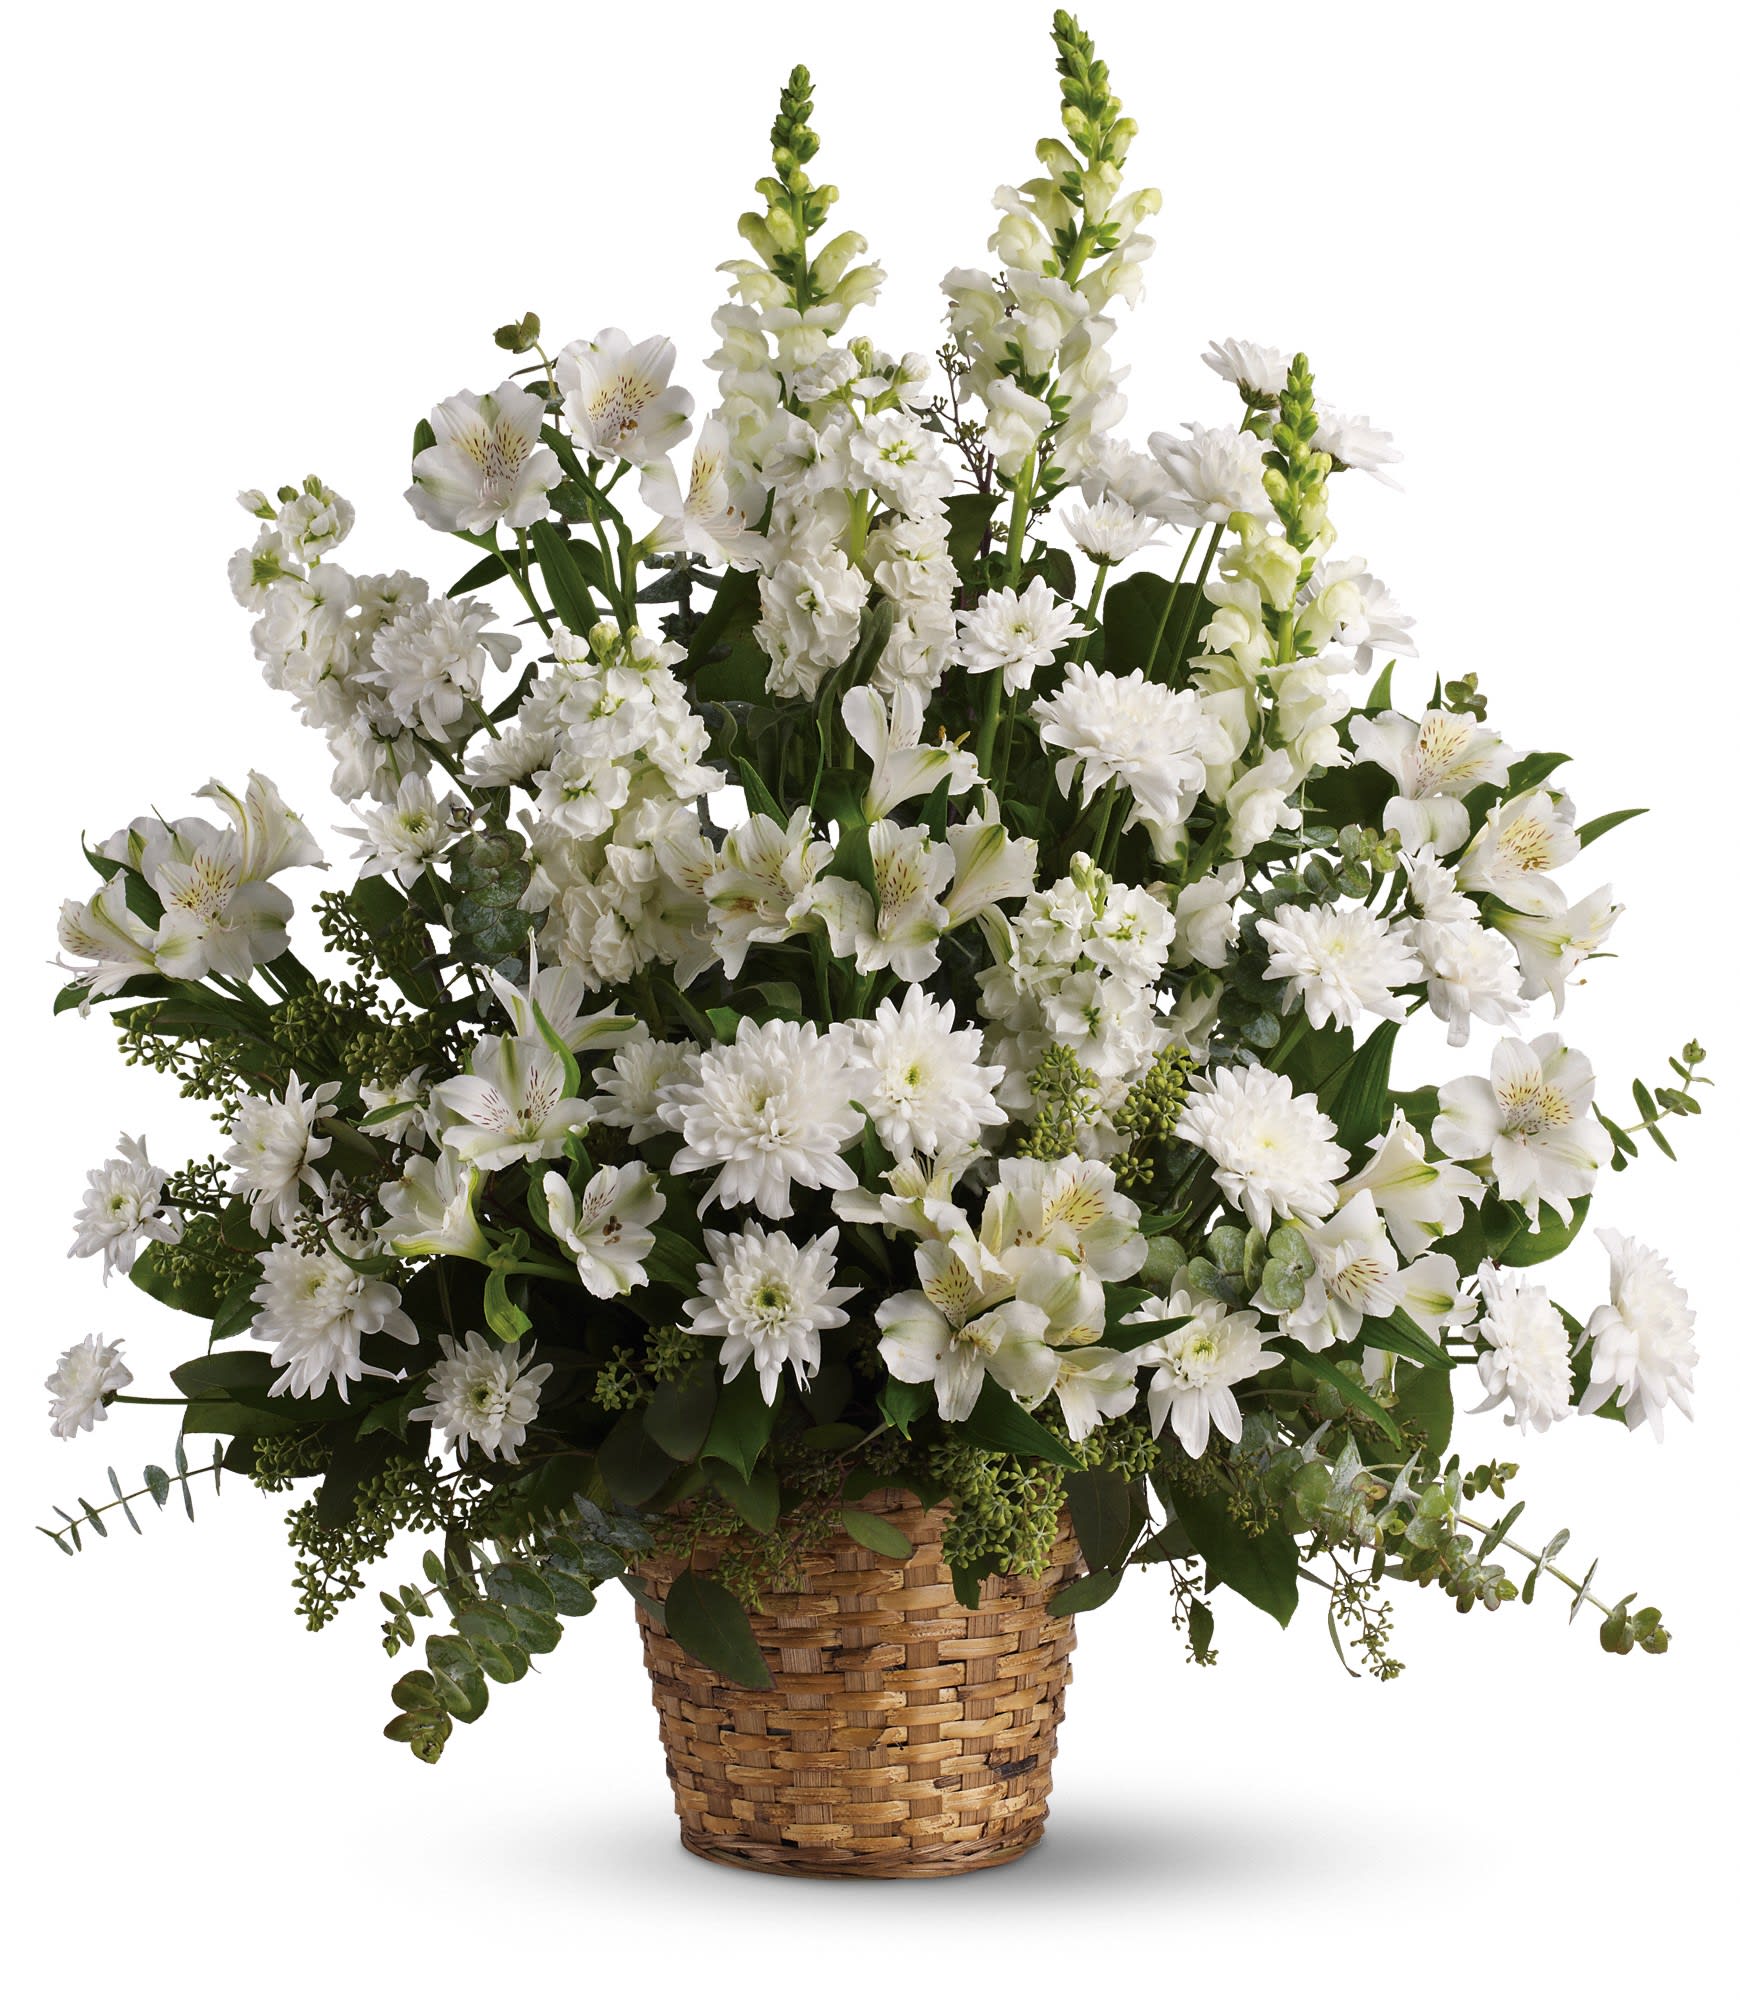 Heavenly Light - White alstroemeria, snapdragons and other blooms  in a beautiful basket is a gift of caring that brings an air of serenity to the memorial service. Later, it may be a comfort for the family at home. ***Color accents and options available.  Please call for details and banners. 